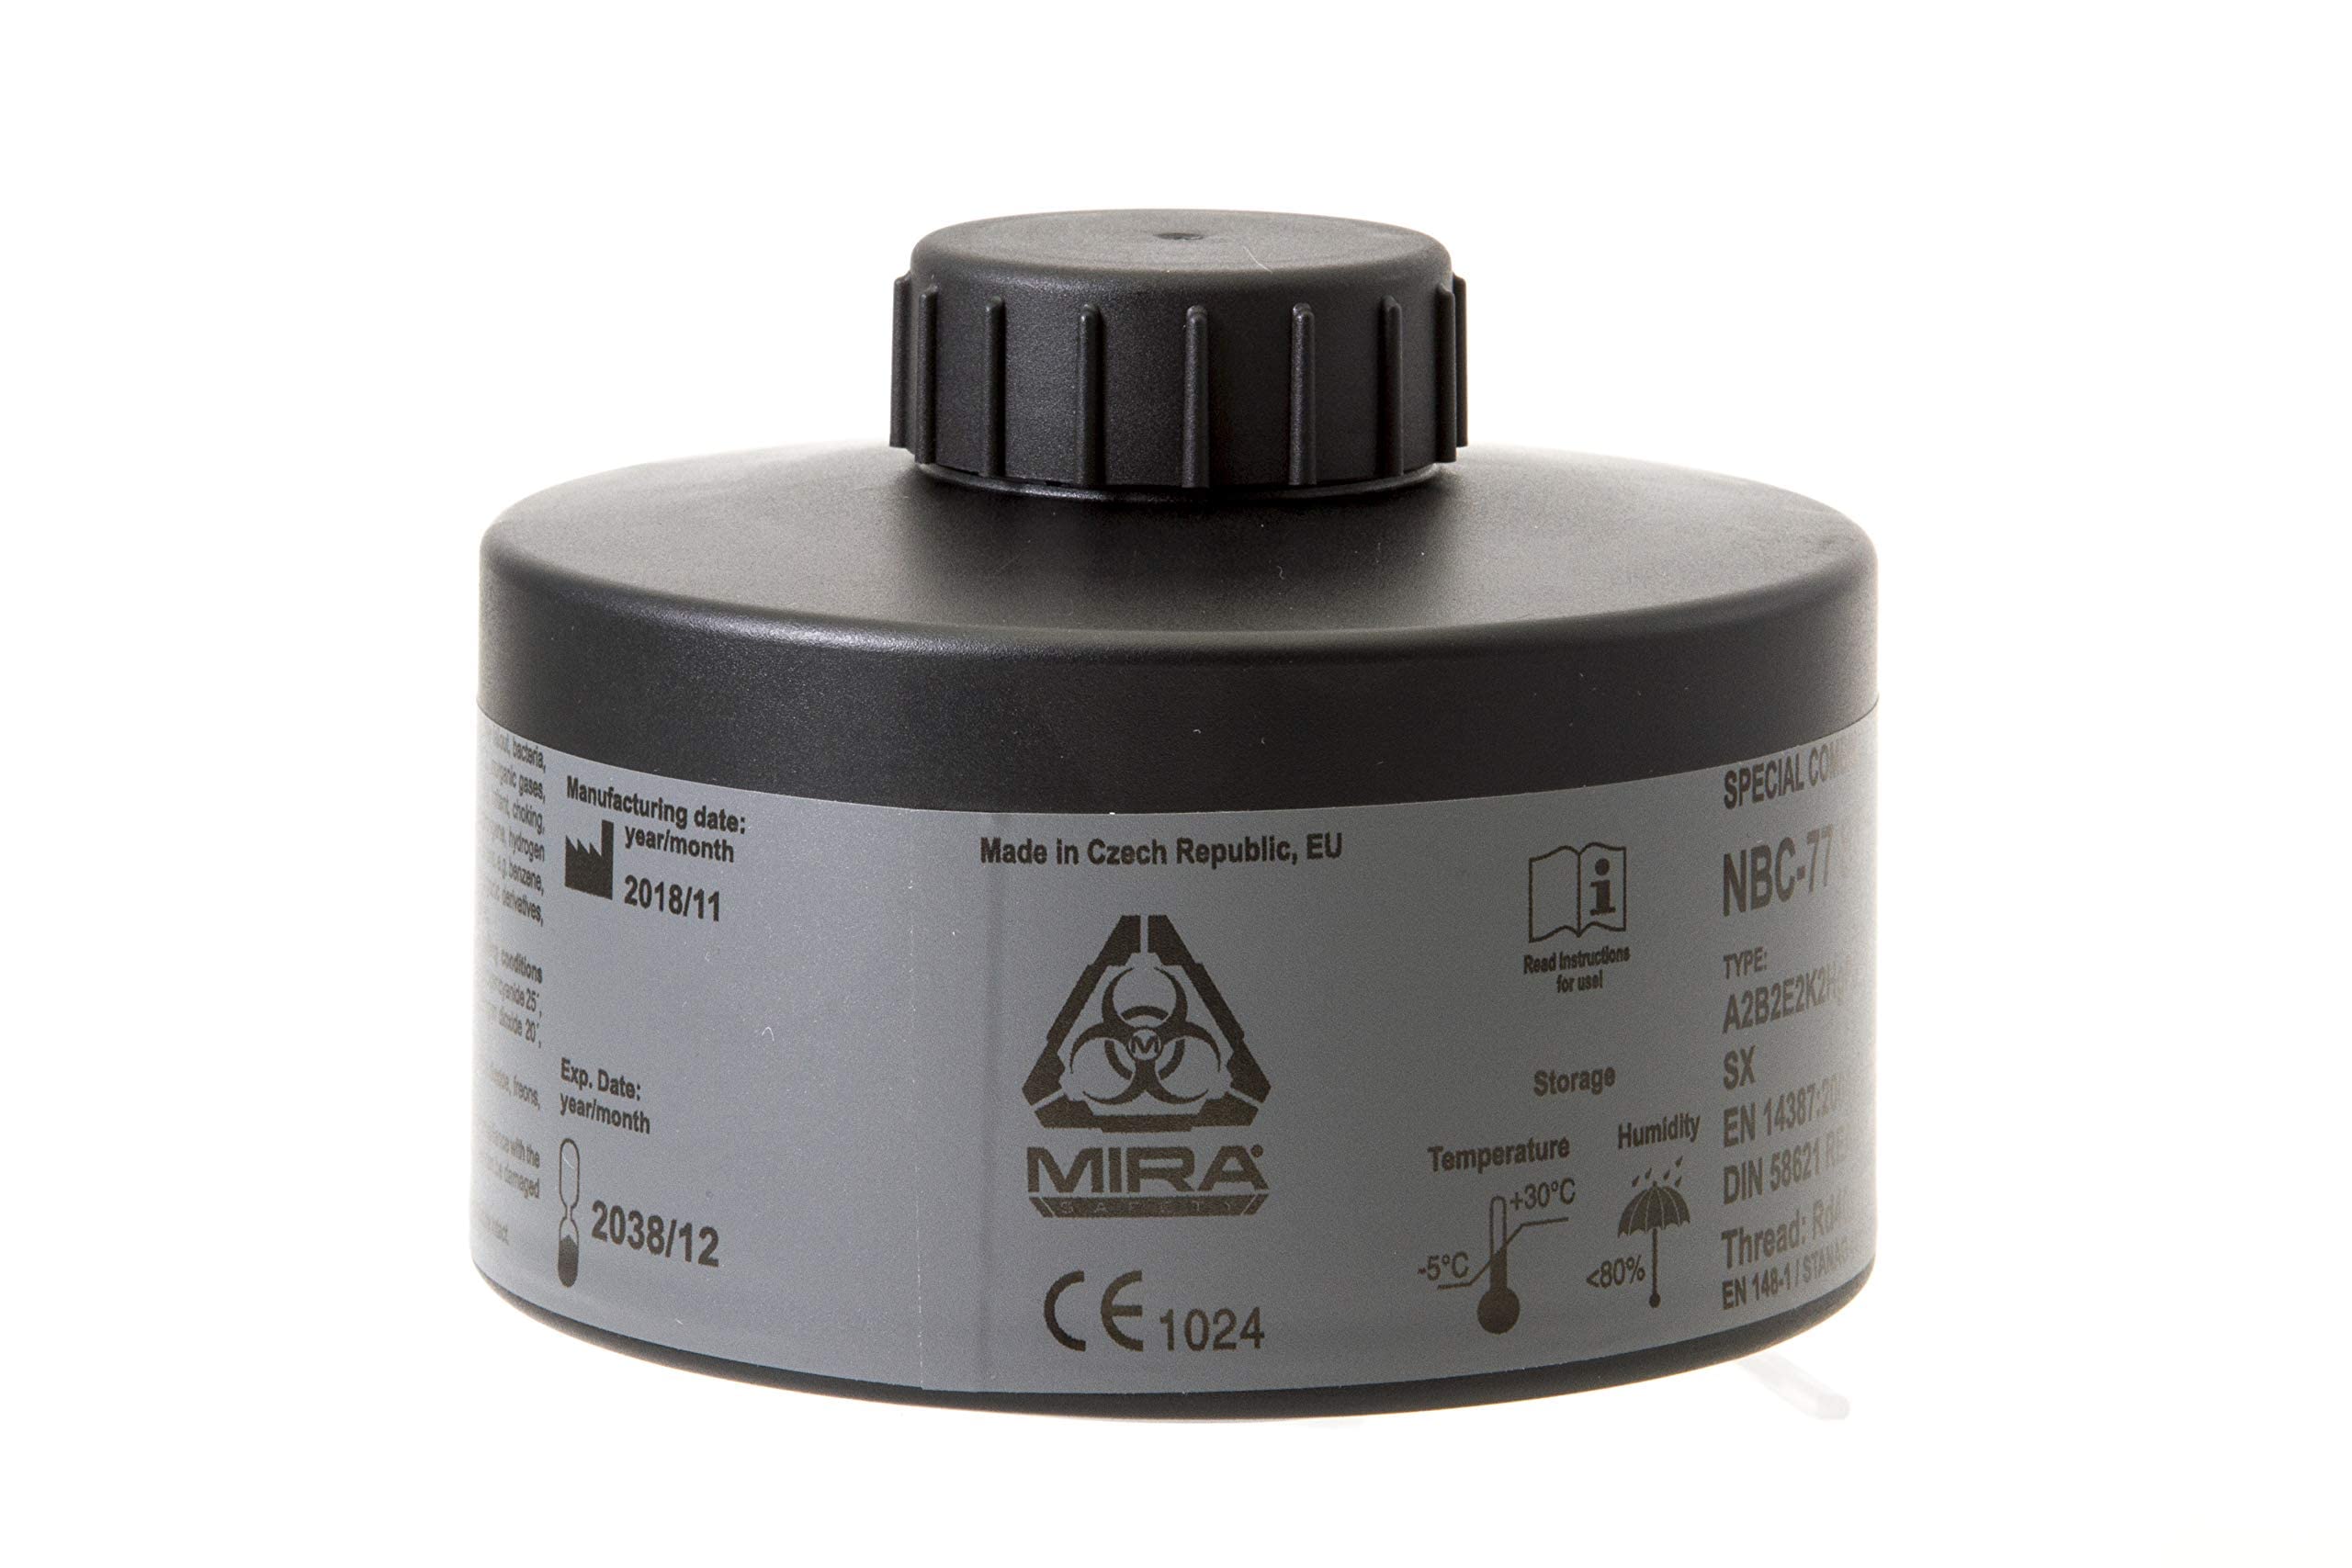 MIRA Safety - NBC-77 SOF - Single 40mm Gas Mask Filter - Special Combined CBRN Respirator Filters - NATO Standard Size (40mm x 1/7